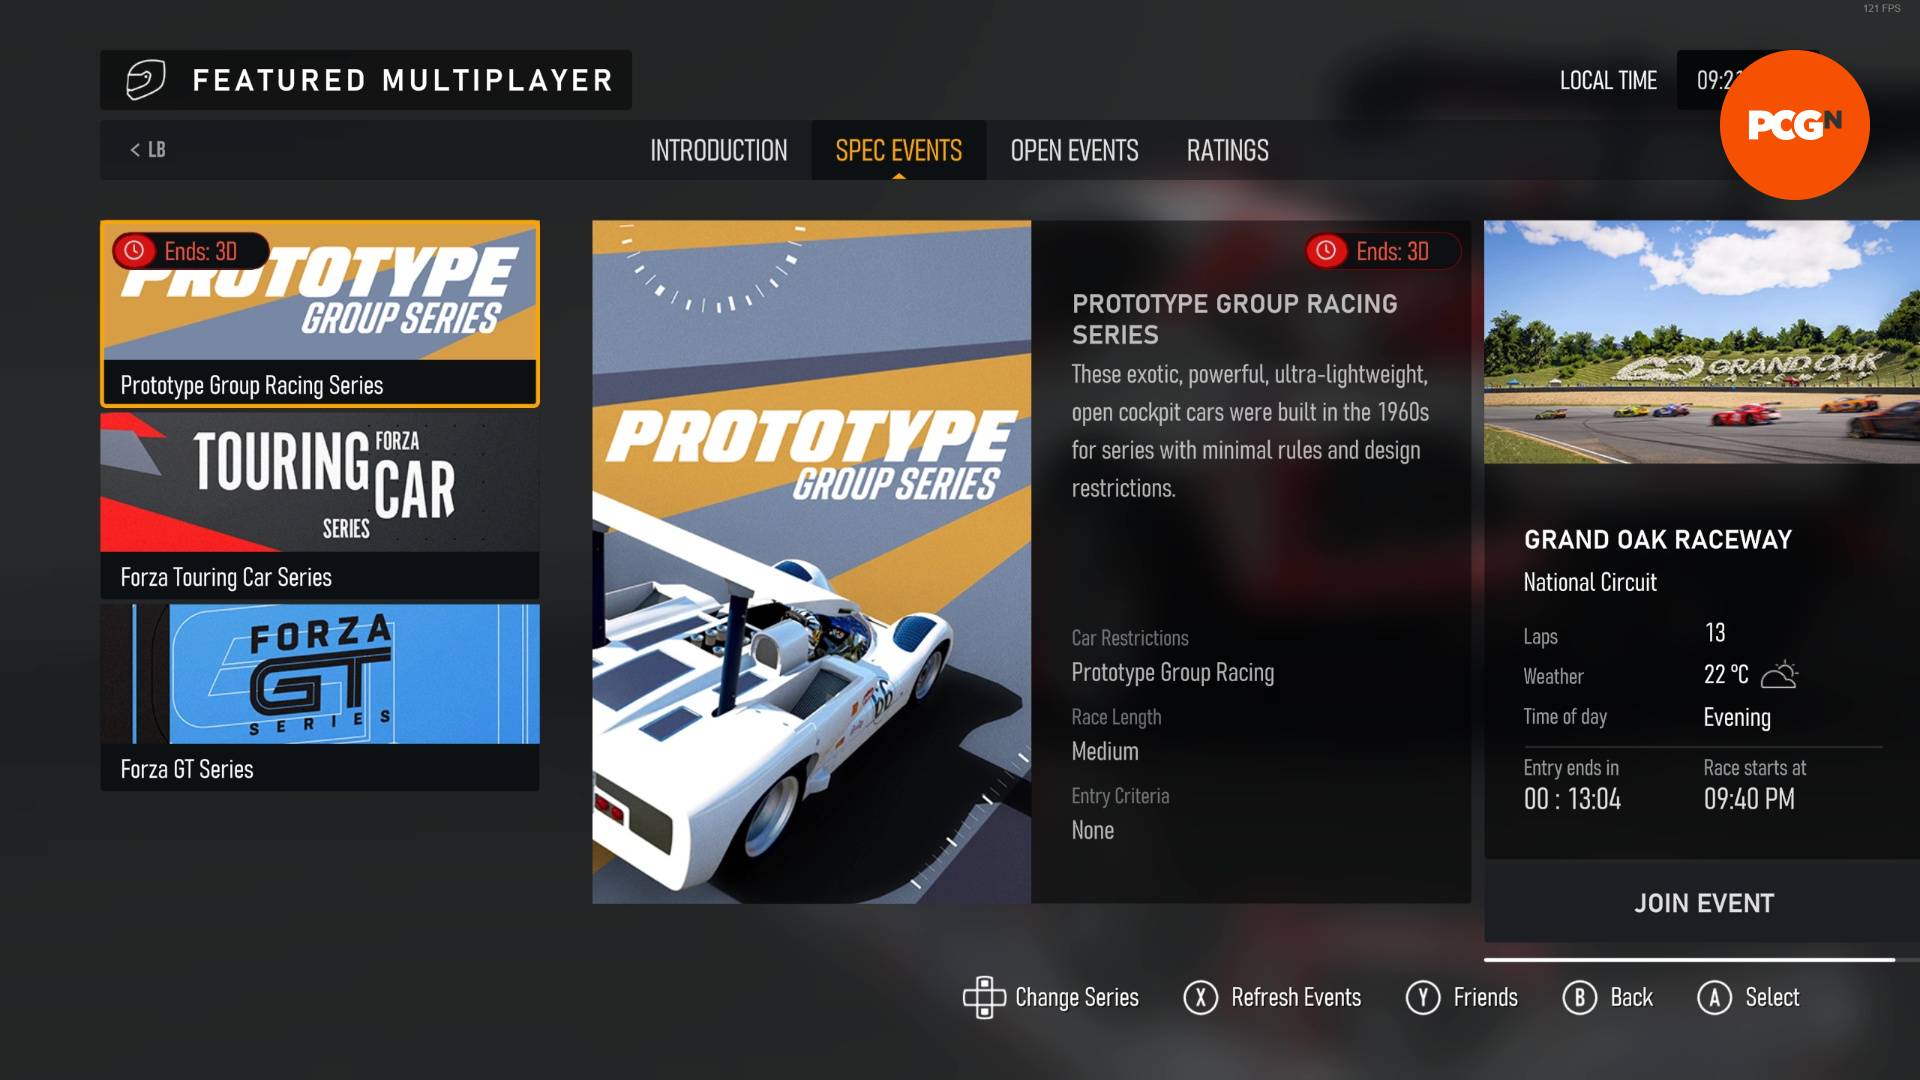  Forza Motorsport review: The multiplayer events on offer in the menus.